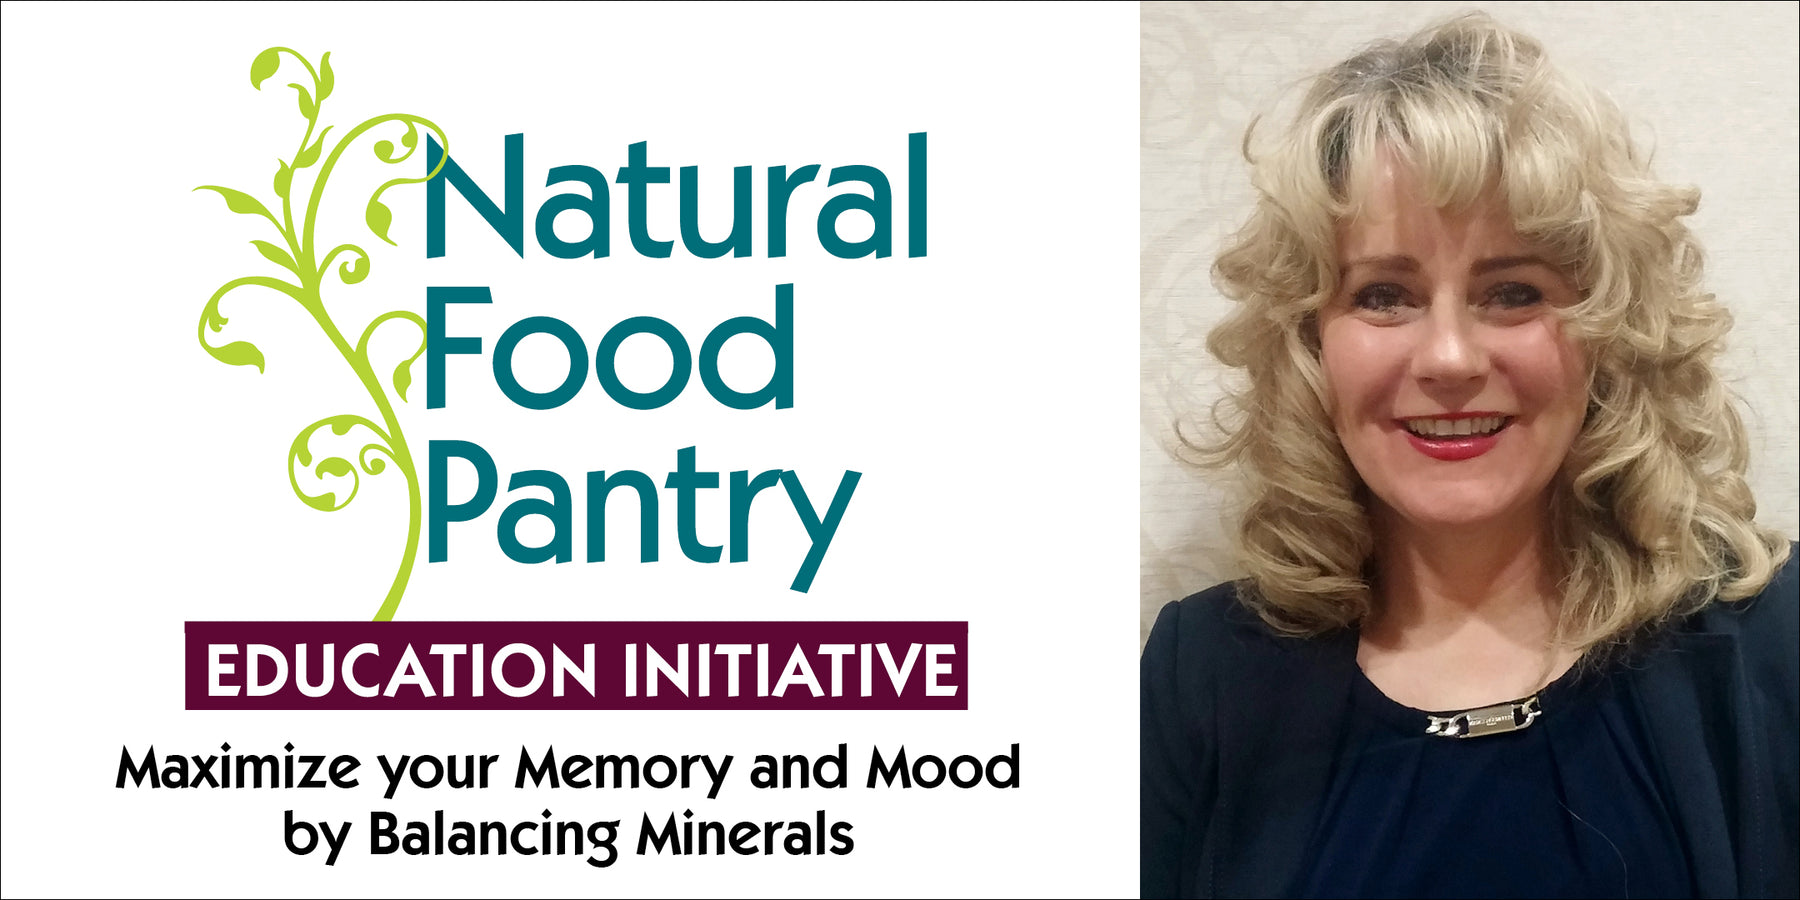 Jul 9: Maximize your Memory and Mood by Balancing Minerals